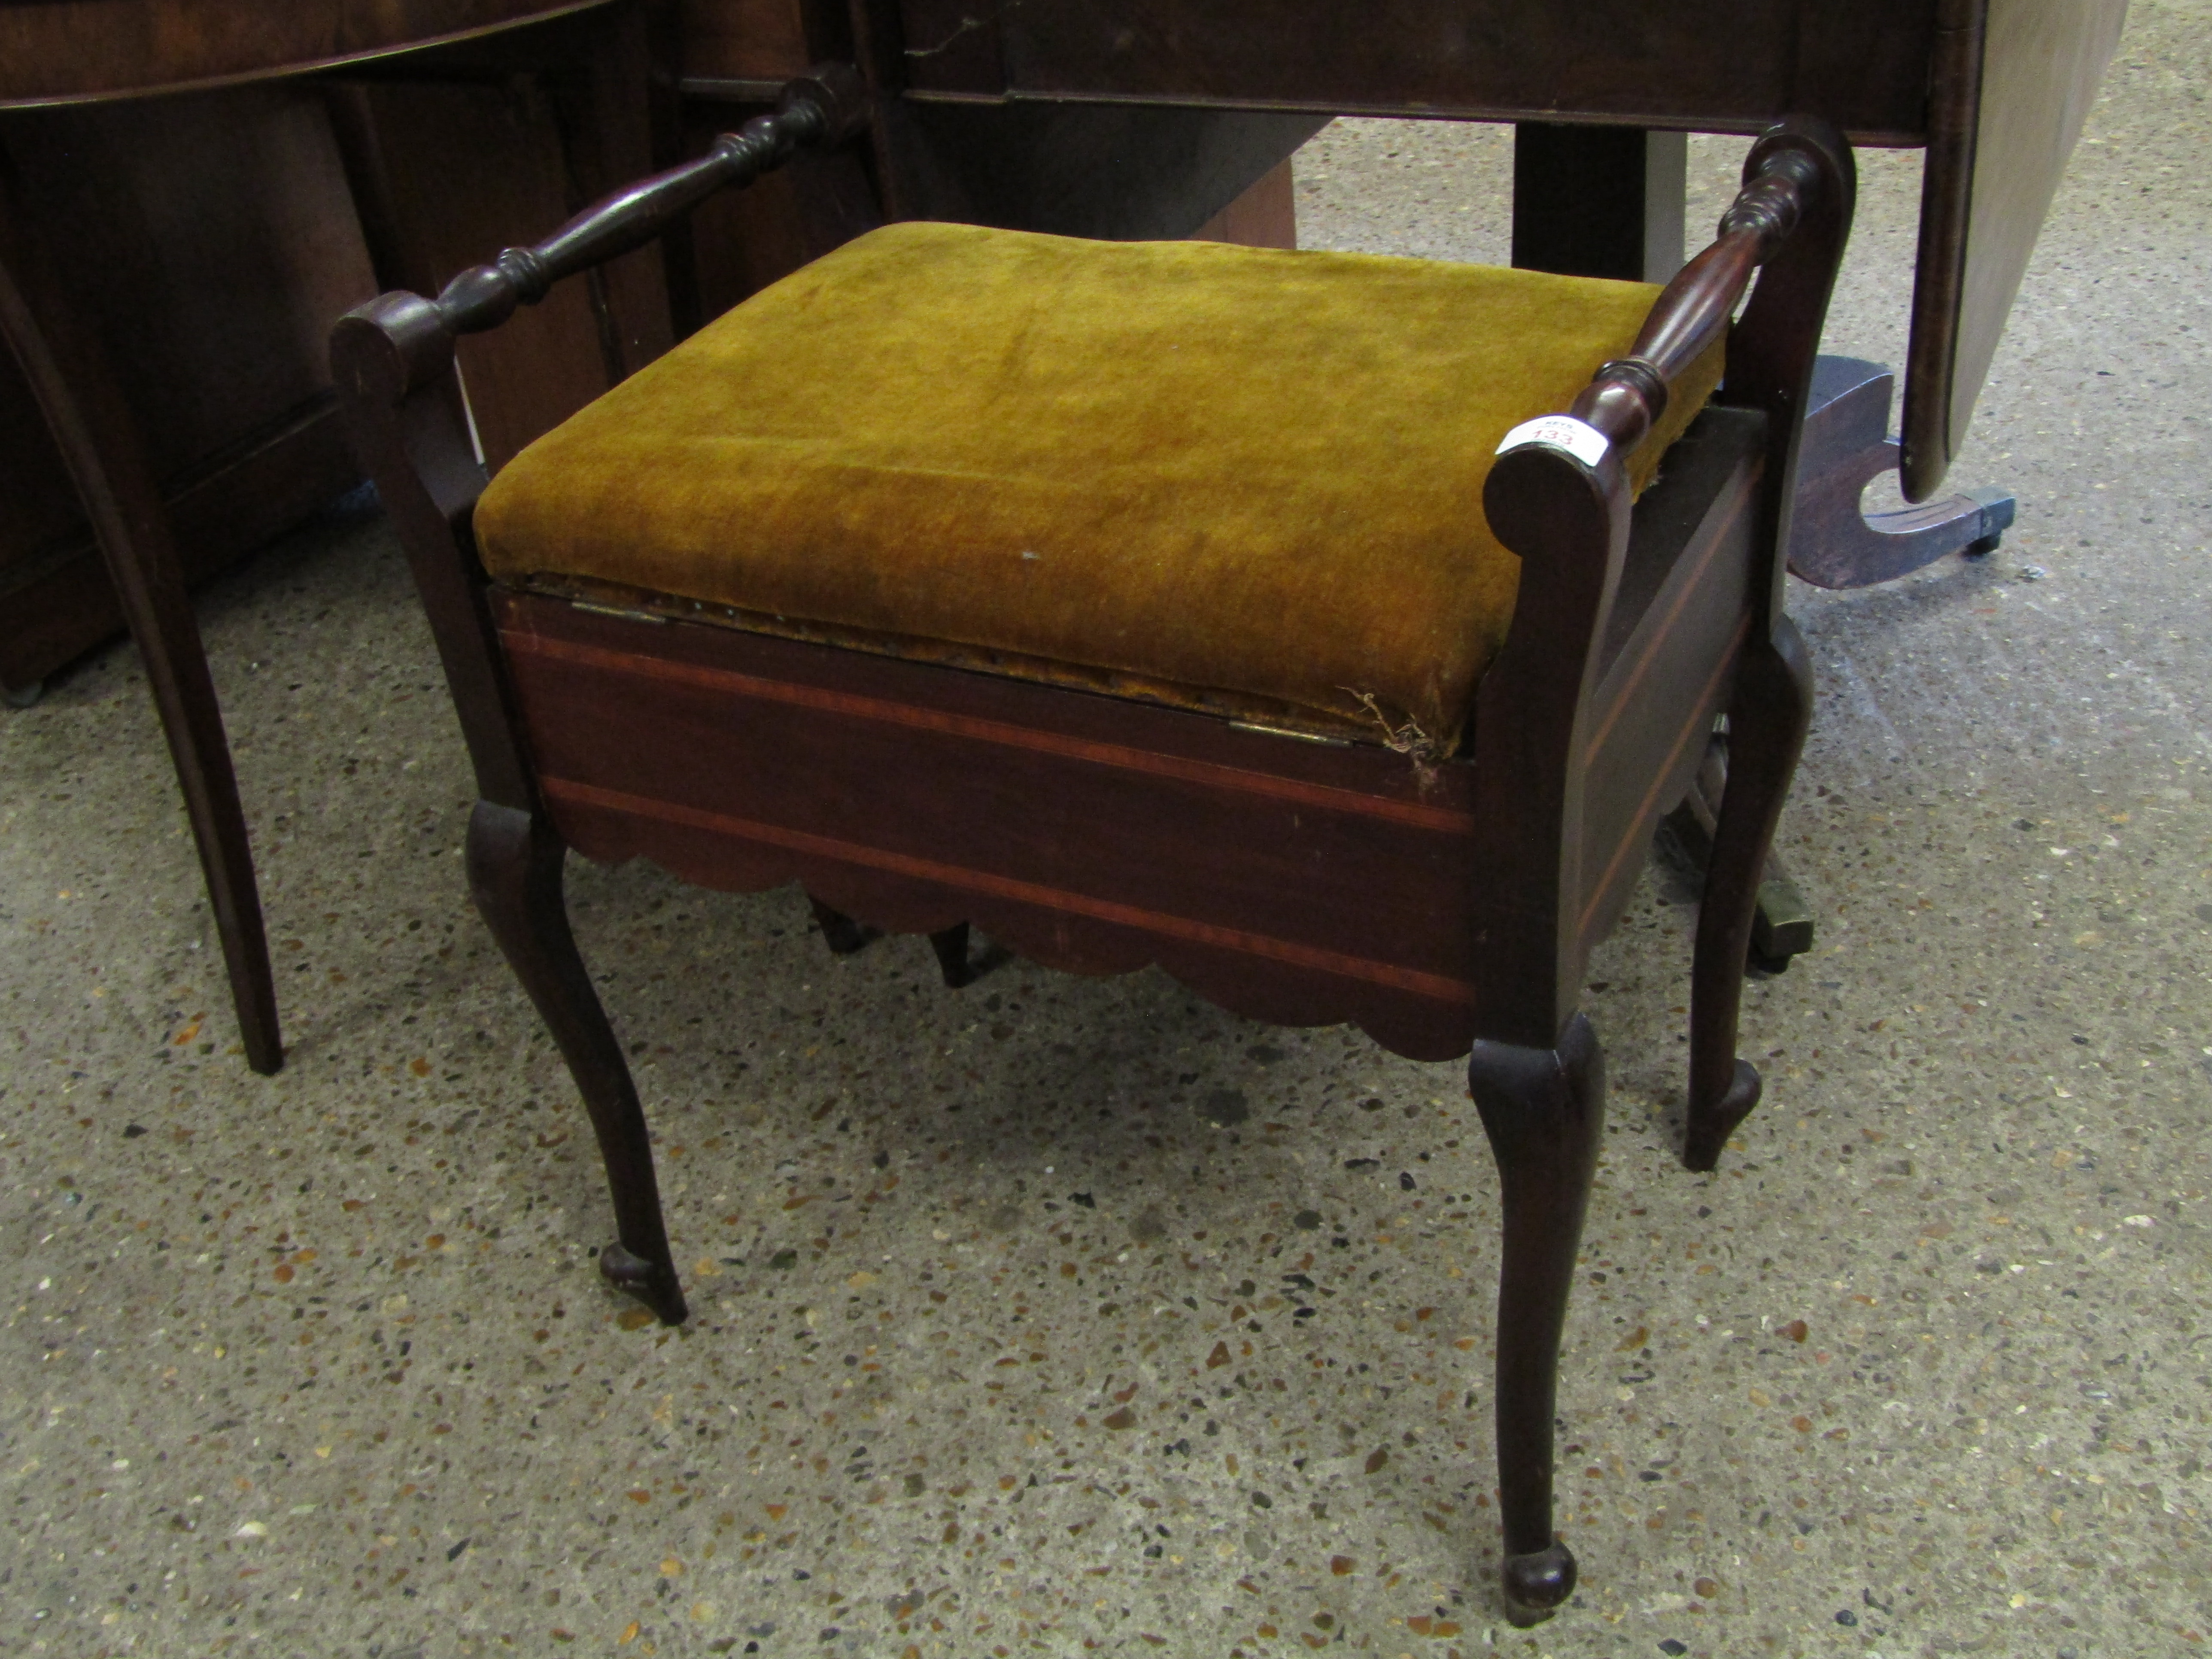 EDWARDIAN WALNUT RAIL SIDED PIANO STOOL WITH UPHOLSTERED LIFT UP LID